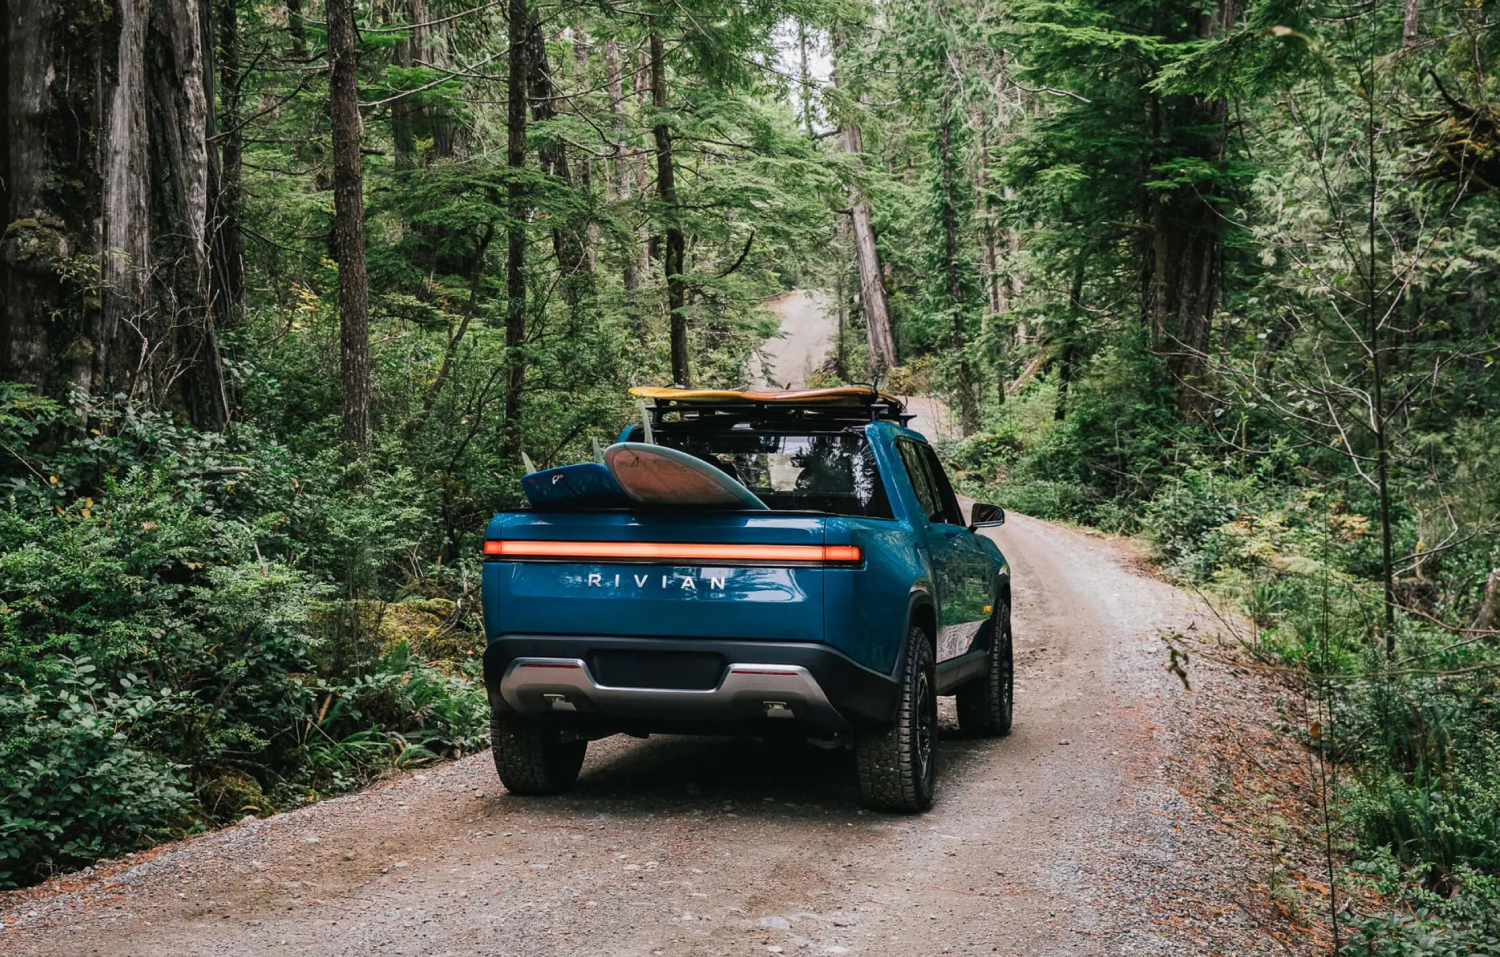 The 2022 Rivian R1T is one of MotorTrends most popular new cars